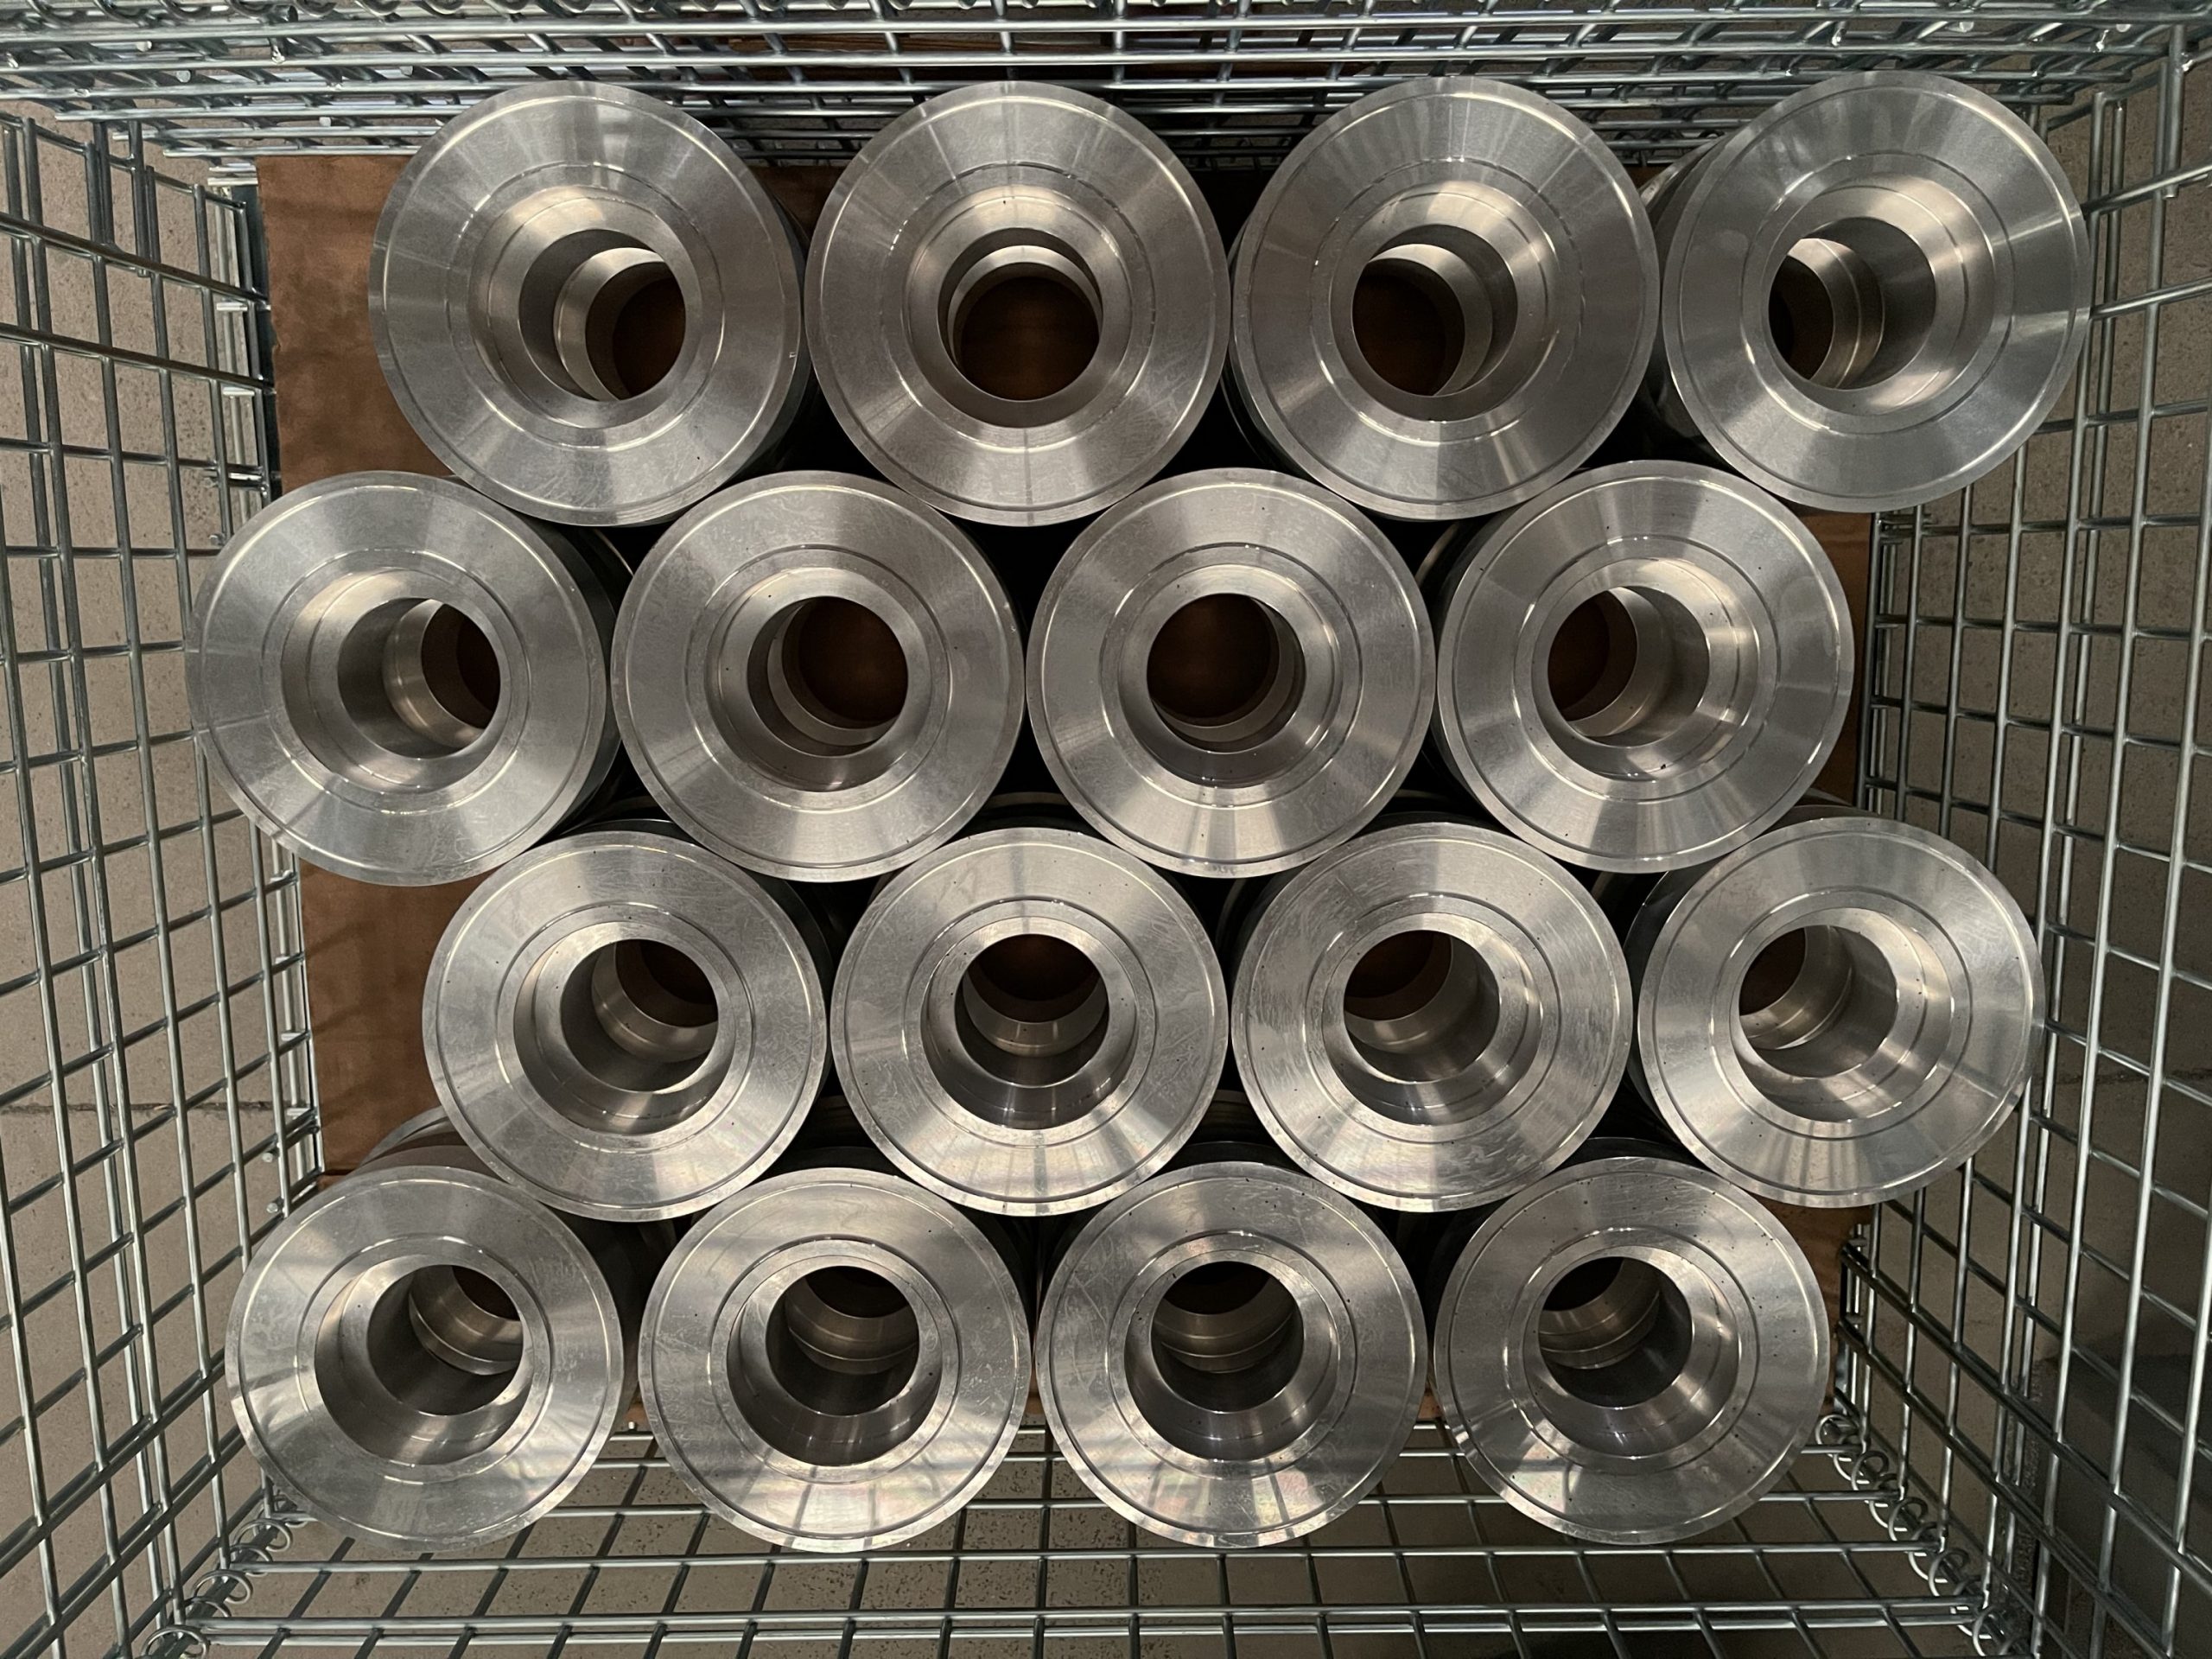 Four rows of stacked wheels from Aubin Industries, Inc.